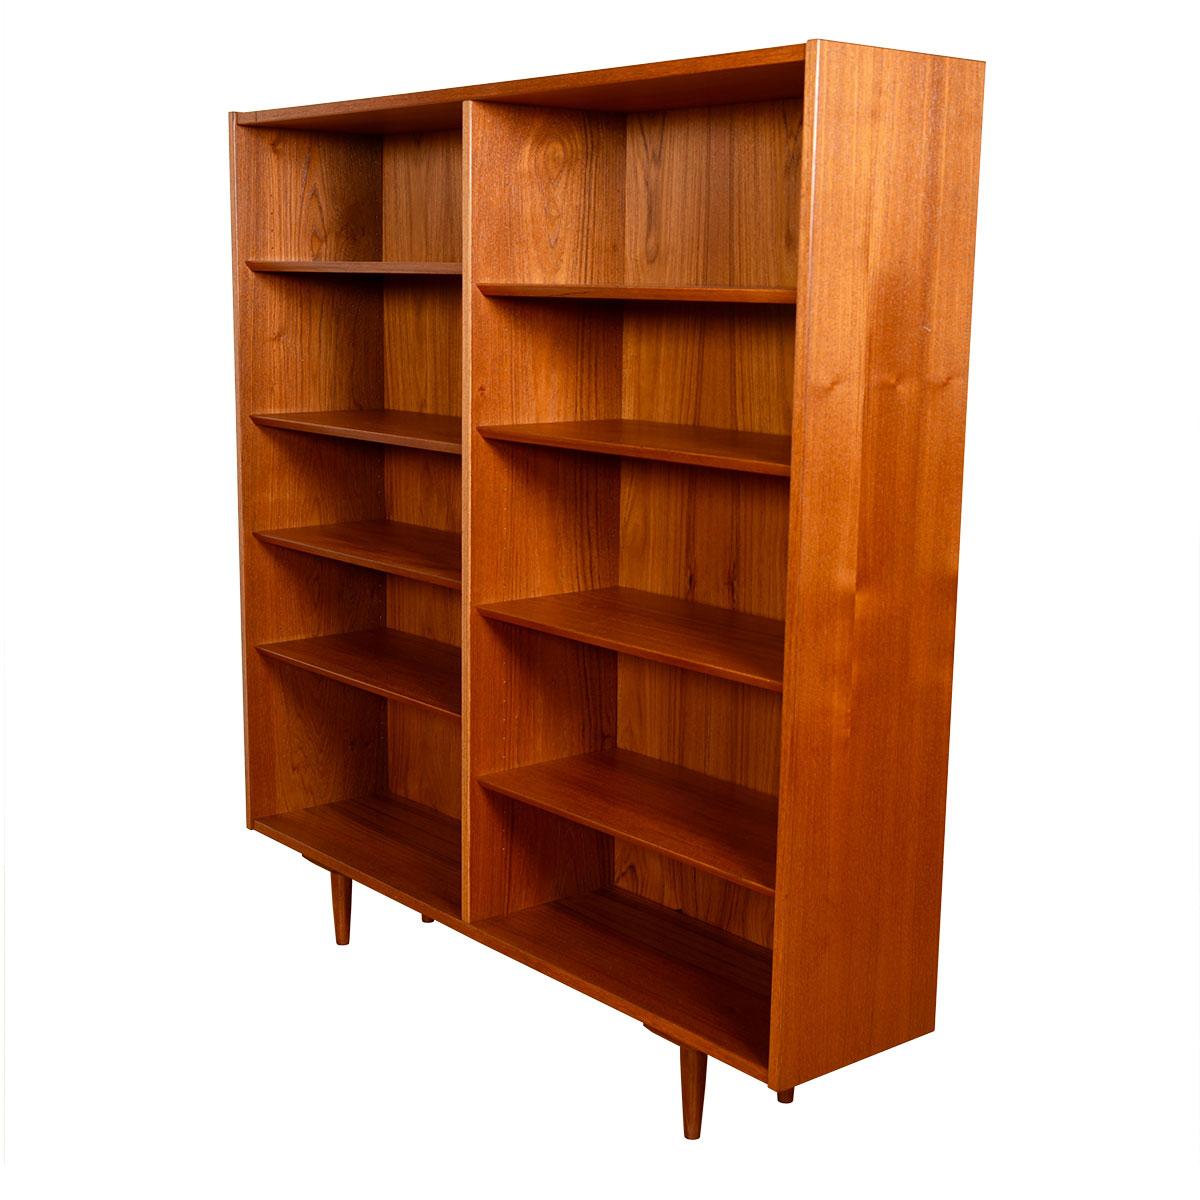 Stunning Danish Modern bookcase. Fabricated of walnut, the graining and tones of the wood make a gorgeous backdrop to any display. The double bookcase has adjustable beveled shelves throughout. The overall styling is straightforward putting the